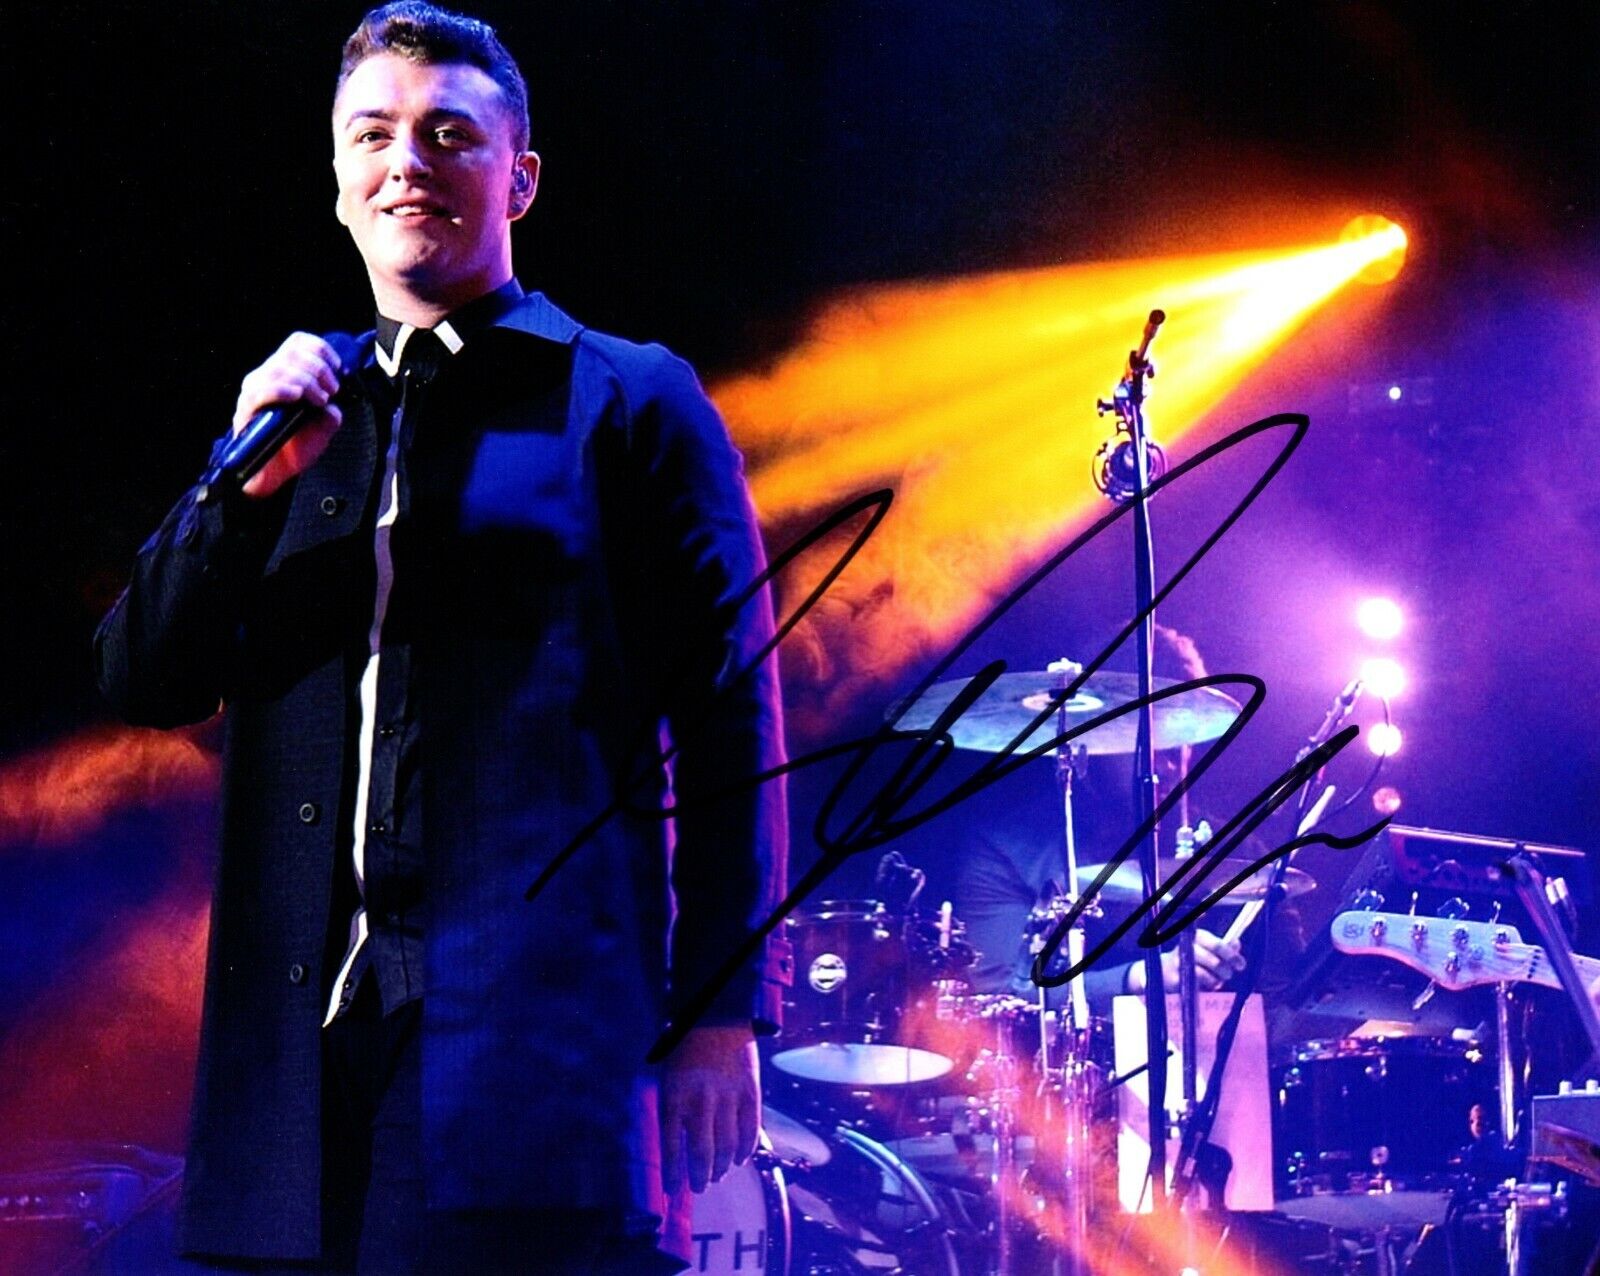 Sam Smith Signed - Autographed Concert Singer 8x10 inch Photo Poster painting with Certificate